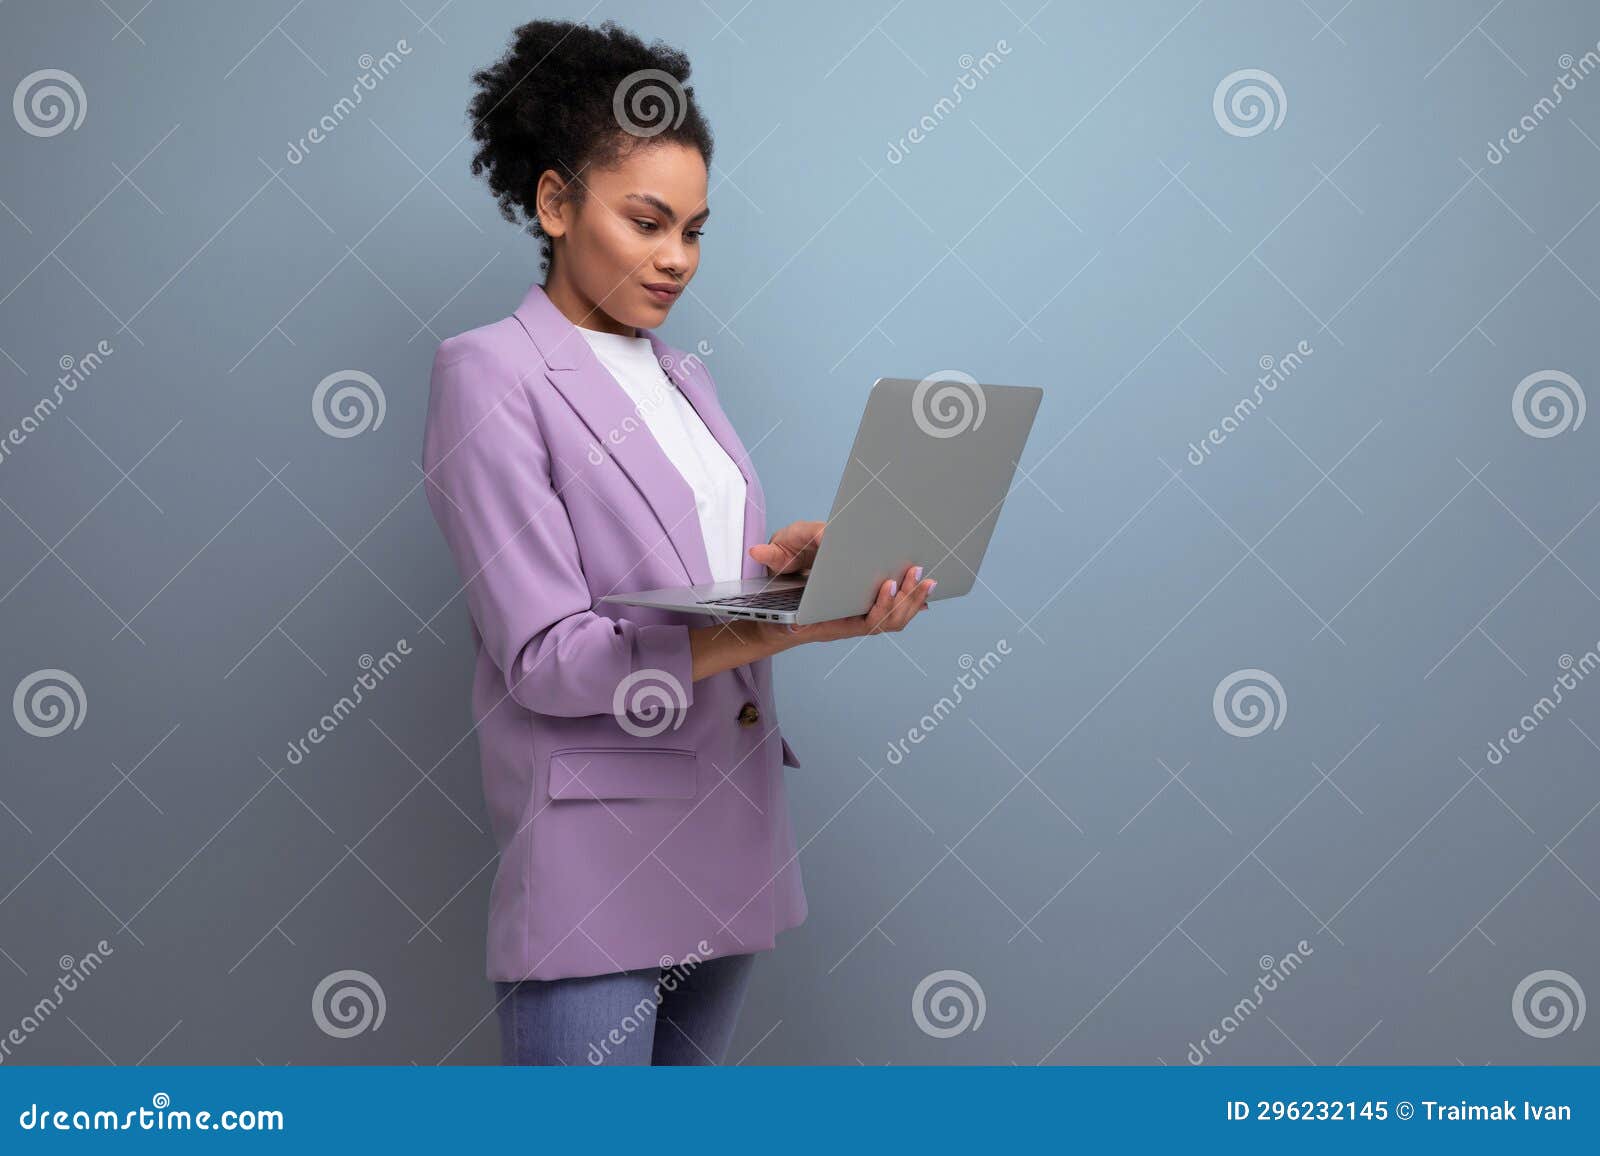 Young Positive Successful Latin Business Woman with Ponytail Hairstyle ...